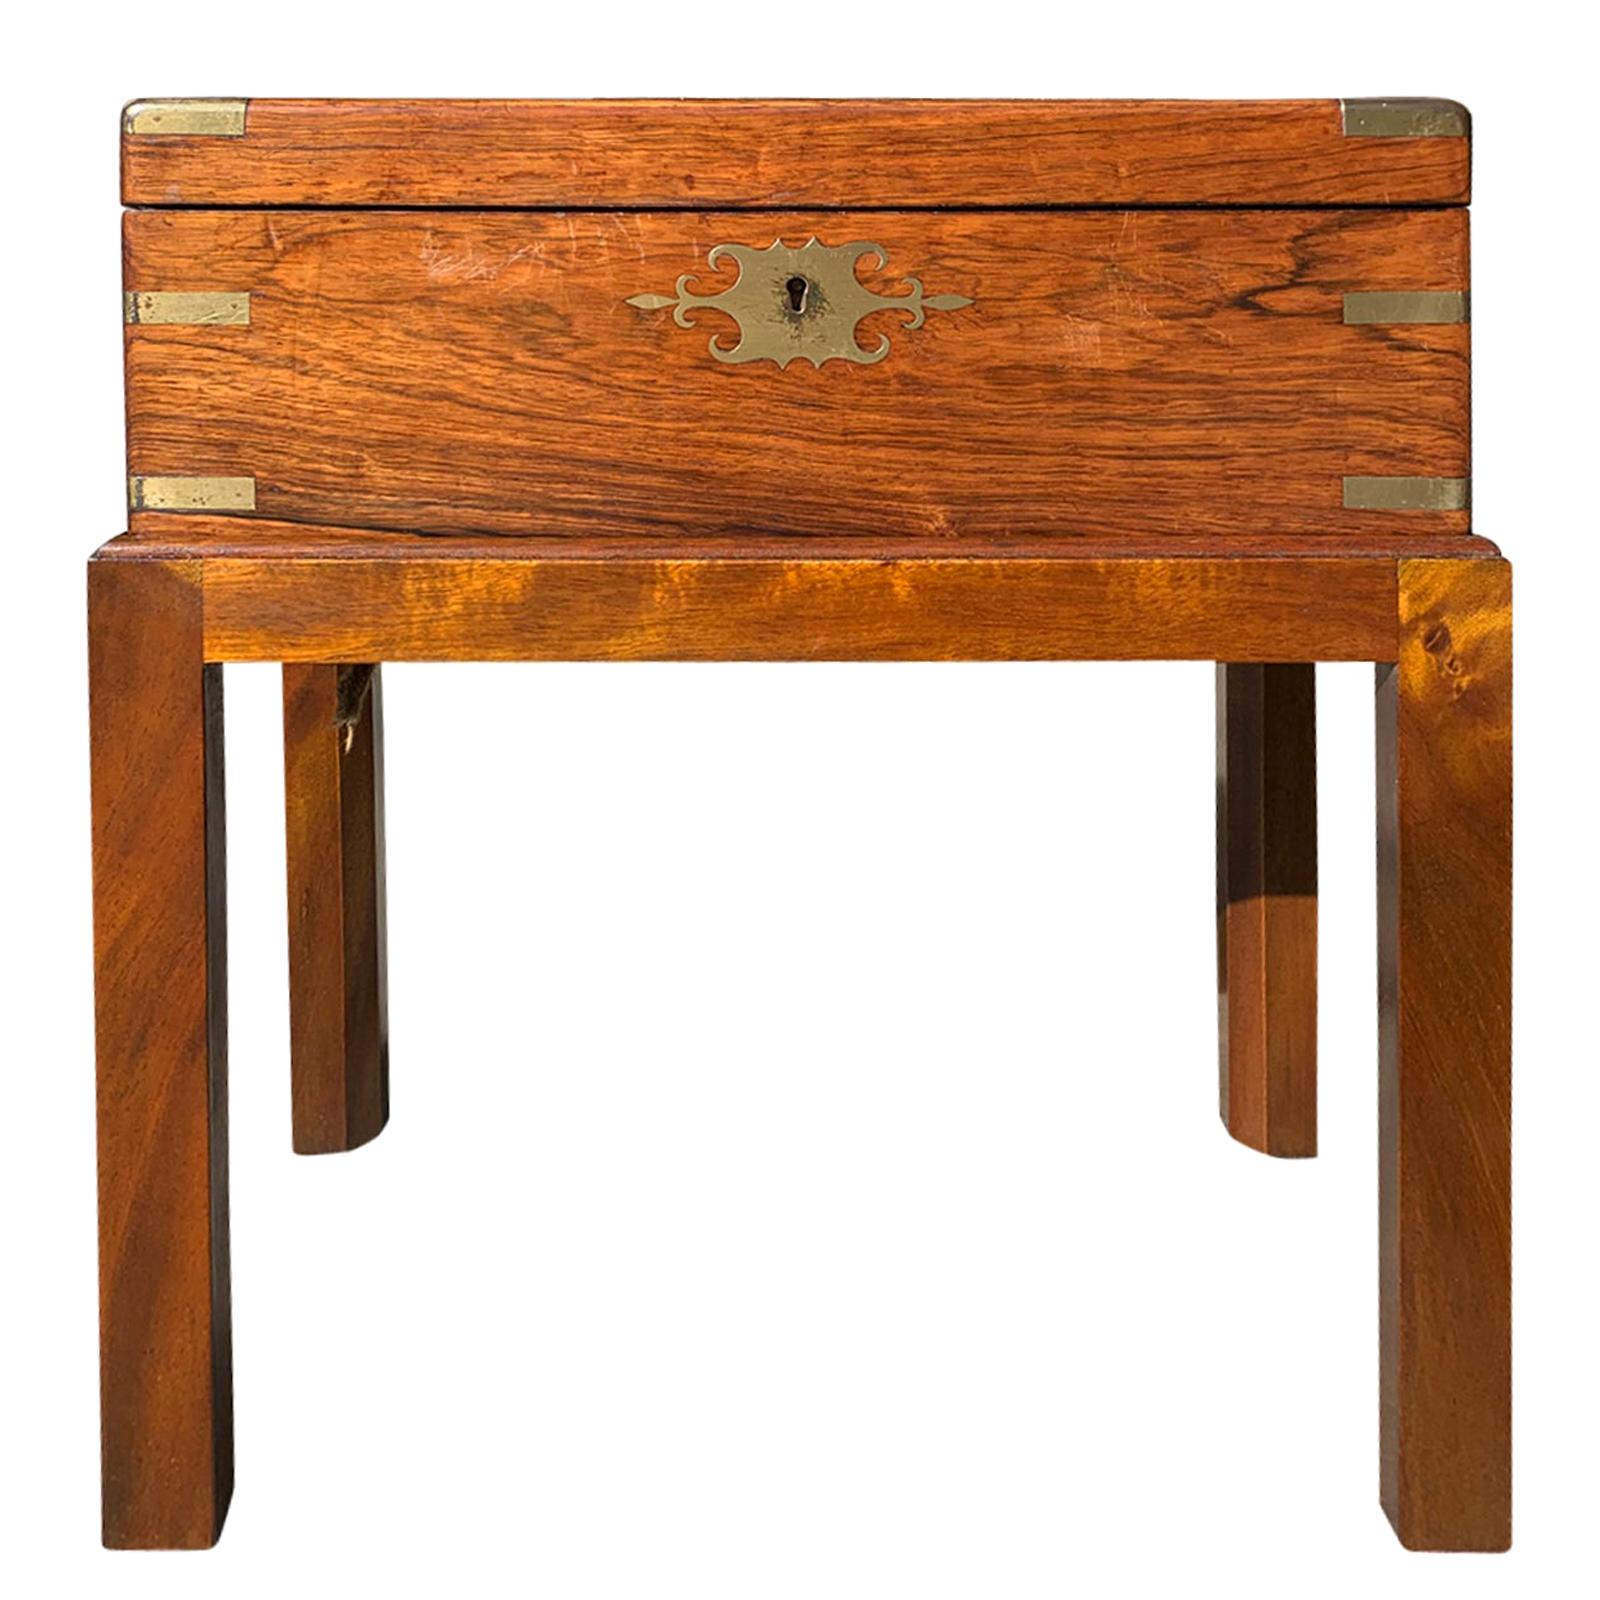 19th Century English Regency Rosewood Lap Desk with Inkwell, Custom Stand